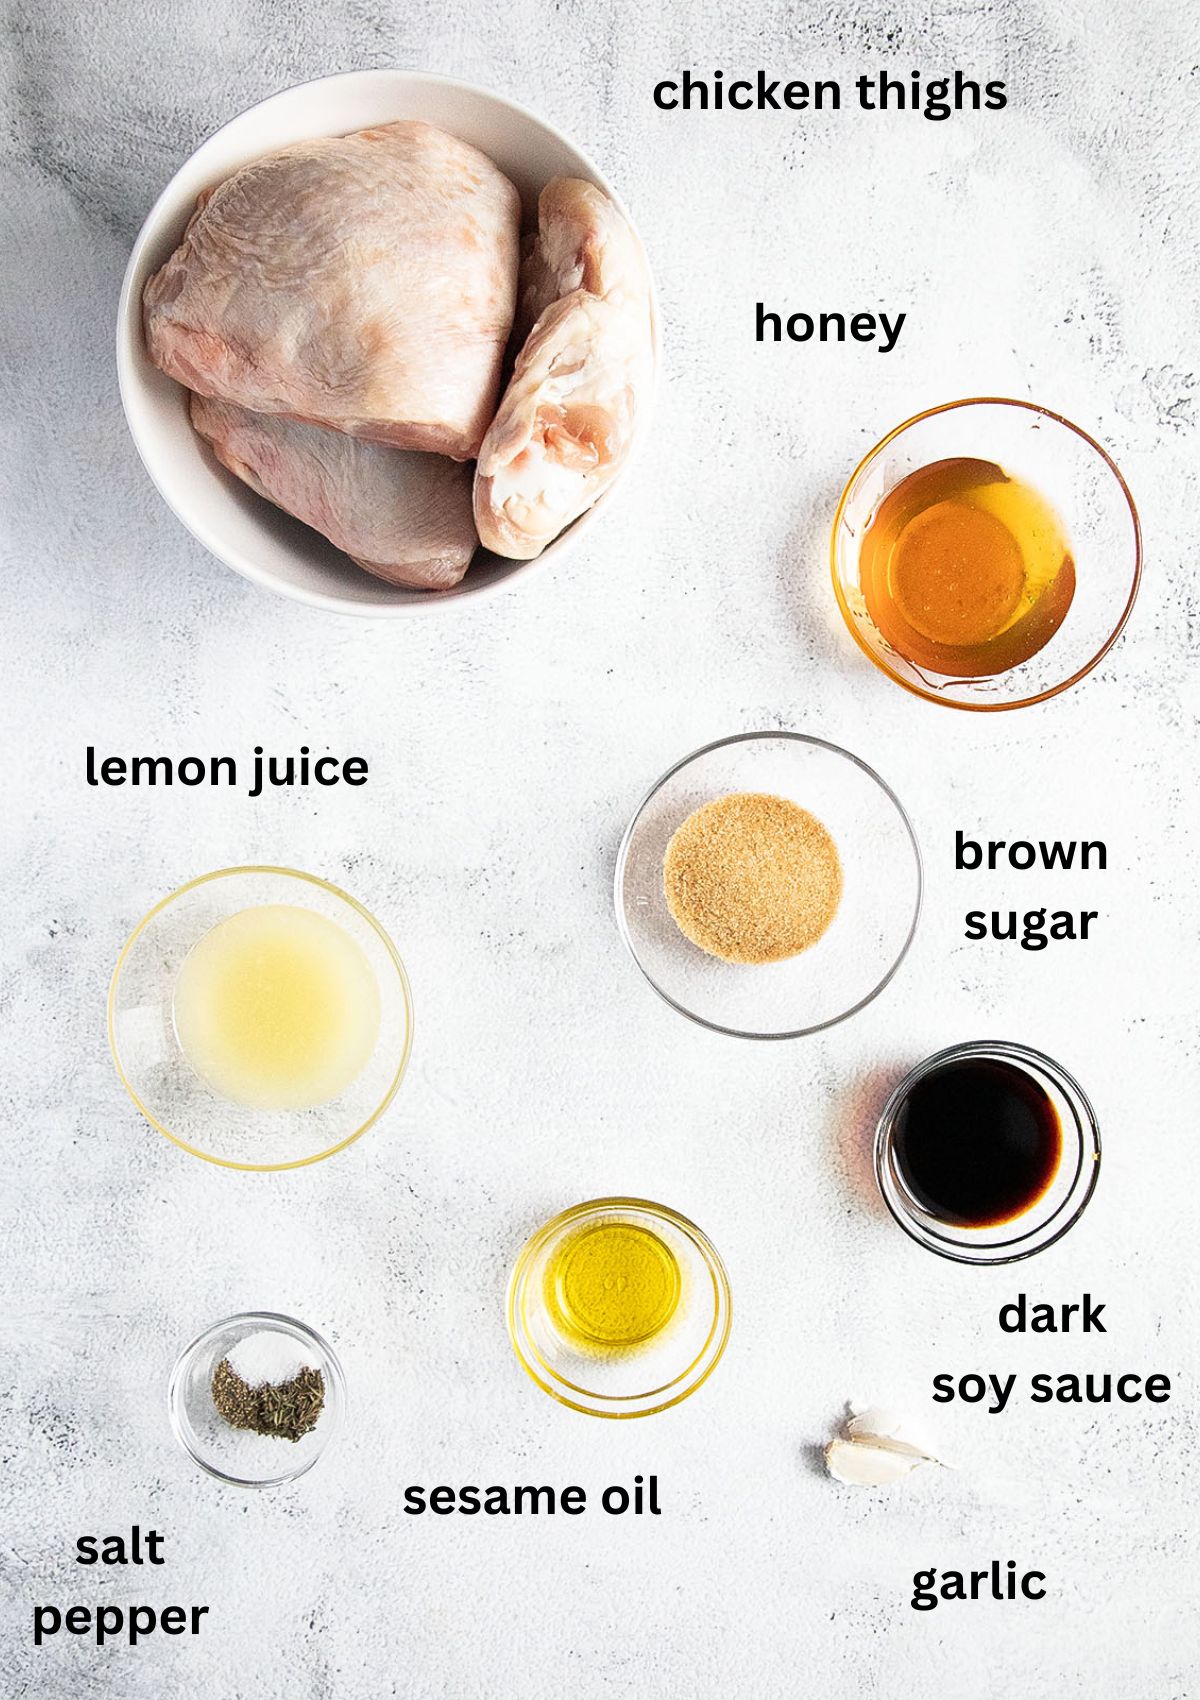 listed ingredients for baking chicken thighs with honey, soy sauce, and garlic.